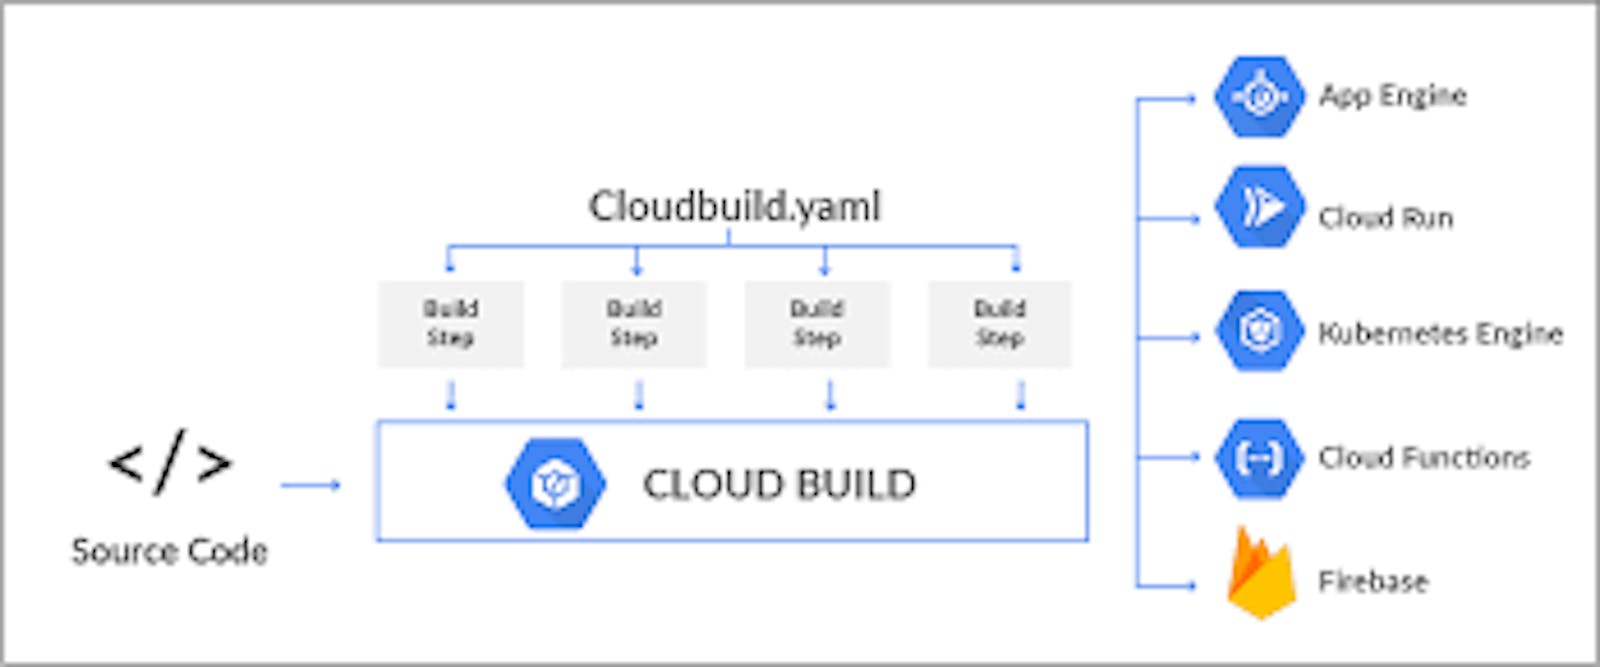 Configure User-Specified Service Accounts for GCP Cloud Build